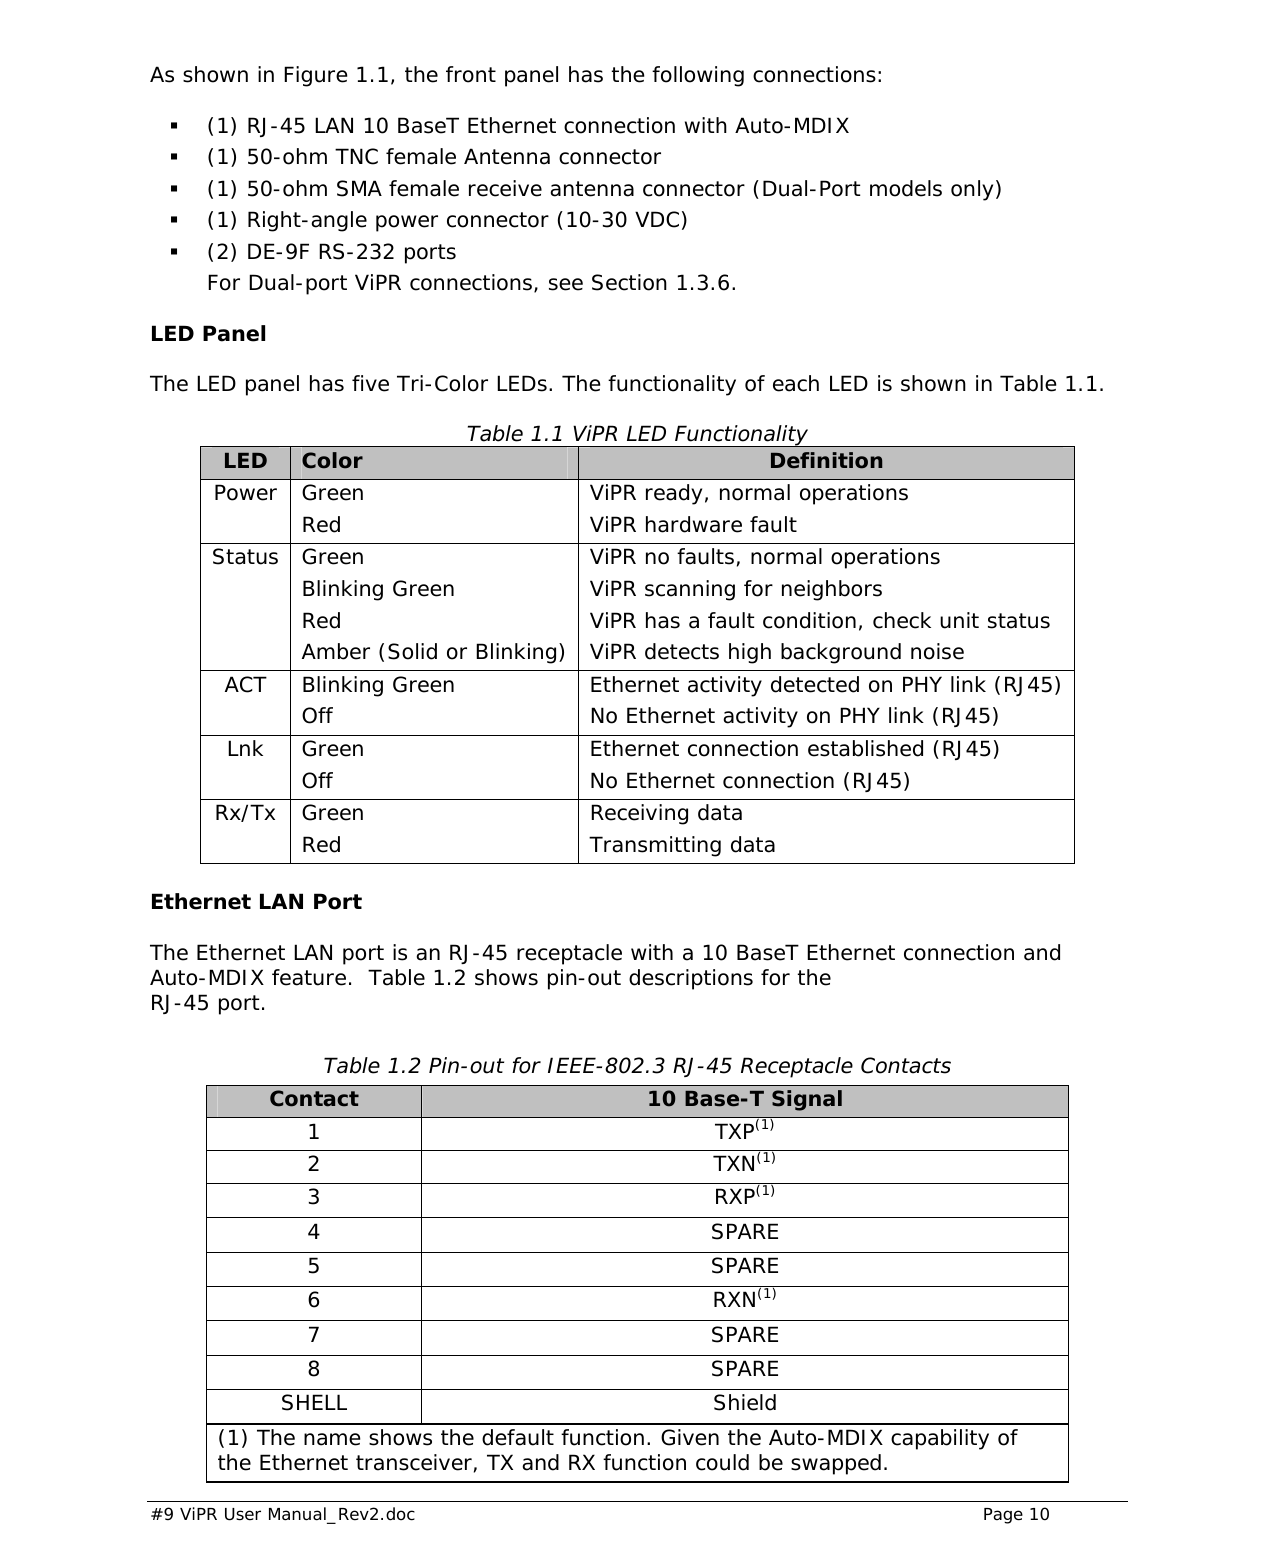  #9 ViPR User Manual_Rev2.doc    Page 10 As shown in Figure 1.1, the front panel has the following connections:   (1) RJ-45 LAN 10 BaseT Ethernet connection with Auto-MDIX  (1) 50-ohm TNC female Antenna connector  (1) 50-ohm SMA female receive antenna connector (Dual-Port models only)  (1) Right-angle power connector (10-30 VDC)  (2) DE-9F RS-232 ports For Dual-port ViPR connections, see Section 1.3.6. LED Panel The LED panel has five Tri-Color LEDs. The functionality of each LED is shown in Table 1.1. Table 1.1 ViPR LED Functionality LED  Color  Definition Power Green Red  ViPR ready, normal operations ViPR hardware fault Status Green Blinking Green Red Amber (Solid or Blinking) ViPR no faults, normal operations ViPR scanning for neighbors ViPR has a fault condition, check unit status ViPR detects high background noise  ACT  Blinking Green Off  Ethernet activity detected on PHY link (RJ45) No Ethernet activity on PHY link (RJ45) Lnk Green Off  Ethernet connection established (RJ45) No Ethernet connection (RJ45) Rx/Tx Green Red  Receiving data  Transmitting data Ethernet LAN Port The Ethernet LAN port is an RJ-45 receptacle with a 10 BaseT Ethernet connection and Auto-MDIX feature.  Table 1.2 shows pin-out descriptions for the  RJ-45 port.          Table 1.2 Pin-out for IEEE-802.3 RJ-45 Receptacle Contacts Contact  10 Base-T Signal 1 TXP(1) 2 TXN(1) 3 RXP(1) 4 SPARE  5 SPARE  6 RXN(1) 7 SPARE  8 SPARE  SHELL Shield (1) The name shows the default function. Given the Auto-MDIX capability of the Ethernet transceiver, TX and RX function could be swapped. 